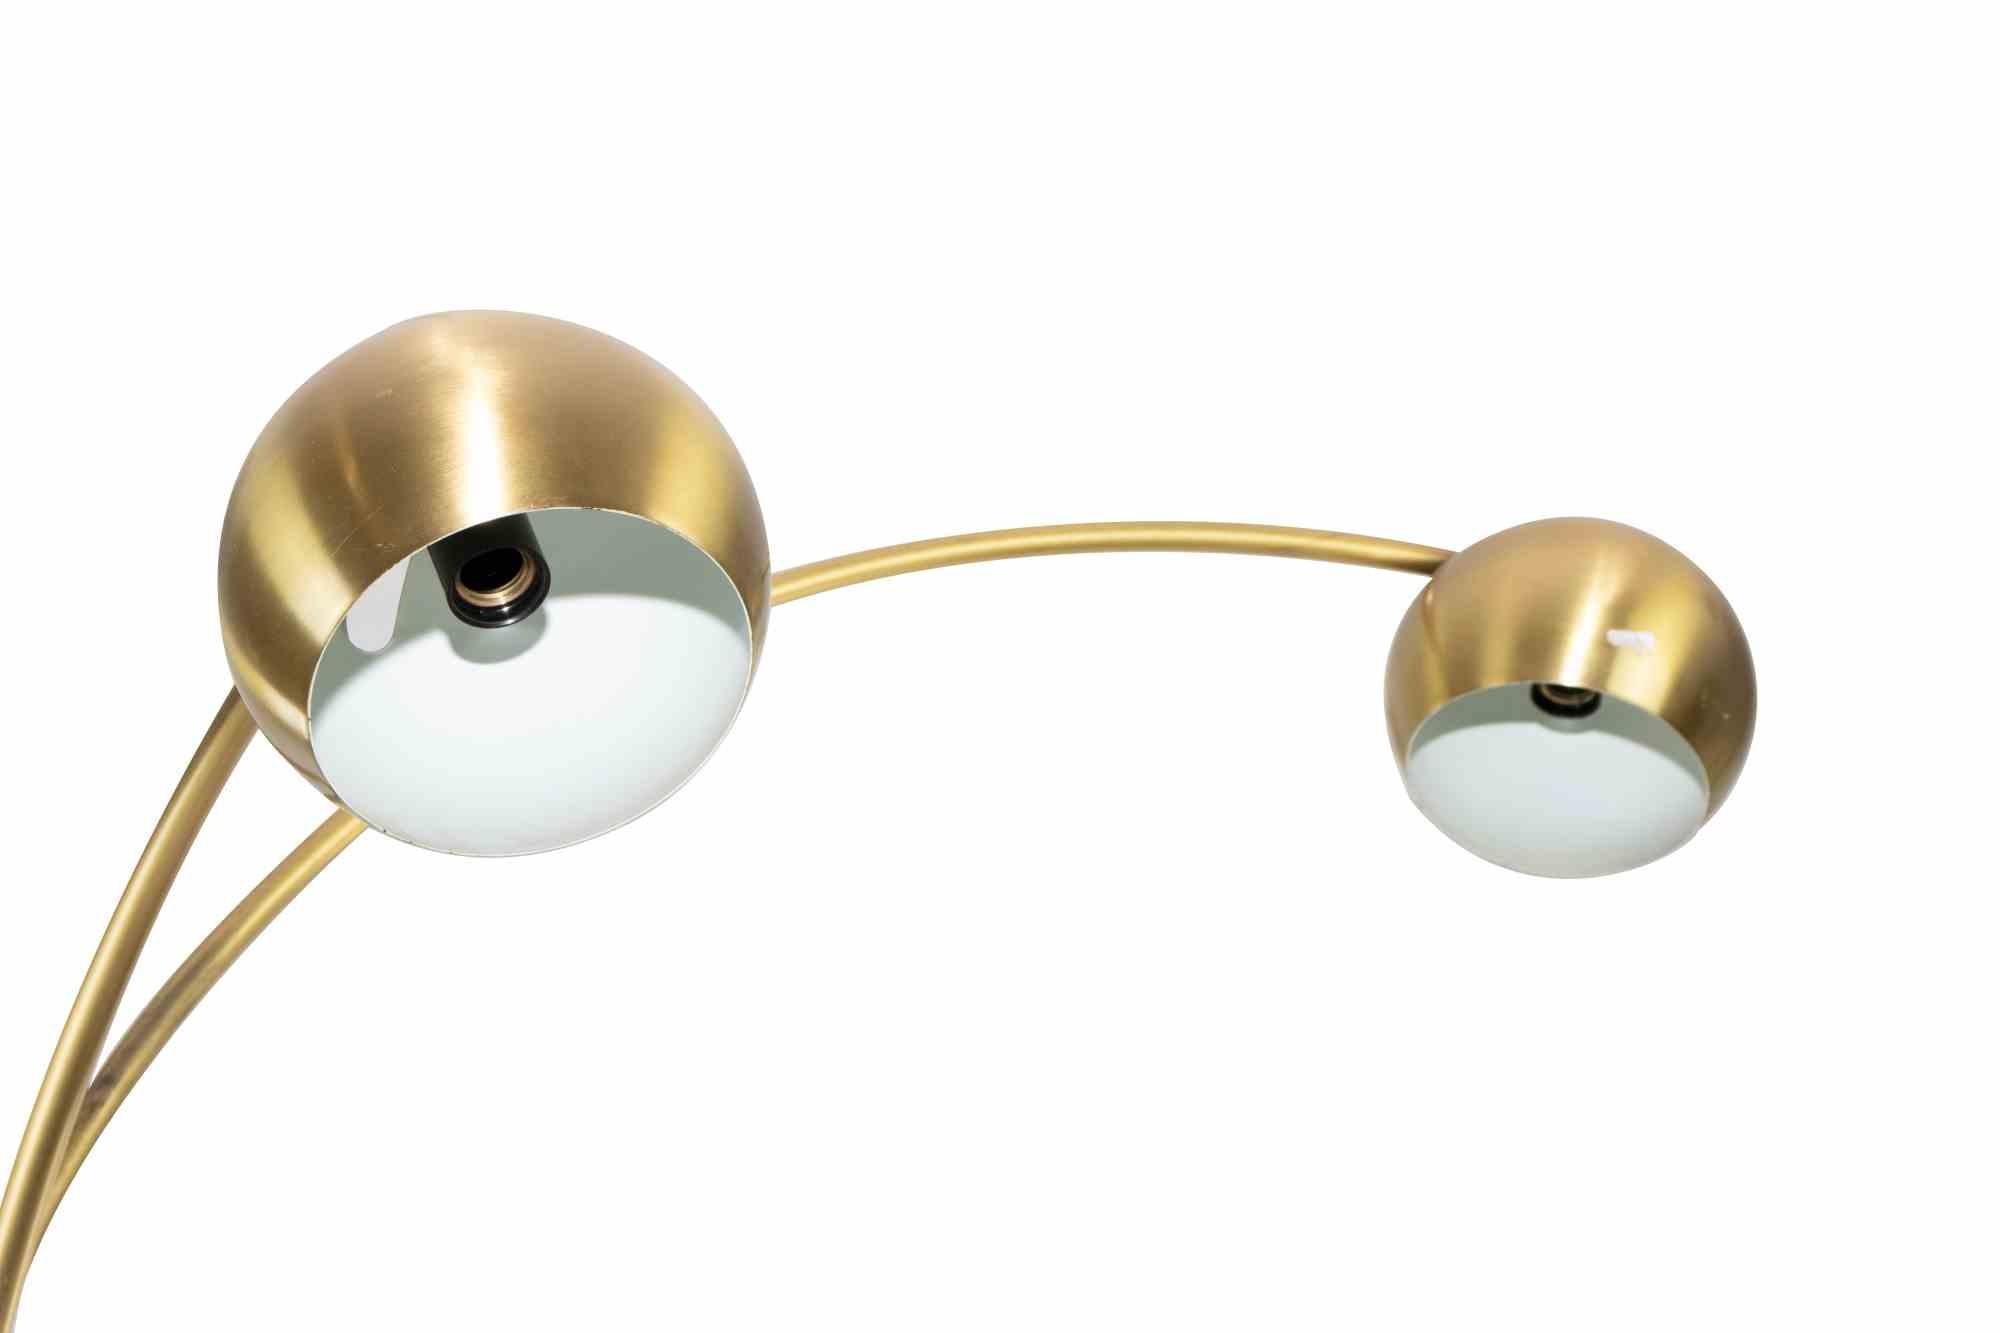 Vintage Brass Floor Lamp Attributed to Goffredo Reggiani, 3 arms with tilting lampshades.

Vintage lamp from 1970s with marble base. 

Maximum extension lenght 175x75 cm; minimum extension lenght 111x35 cm.

Good conditions except for some scratches